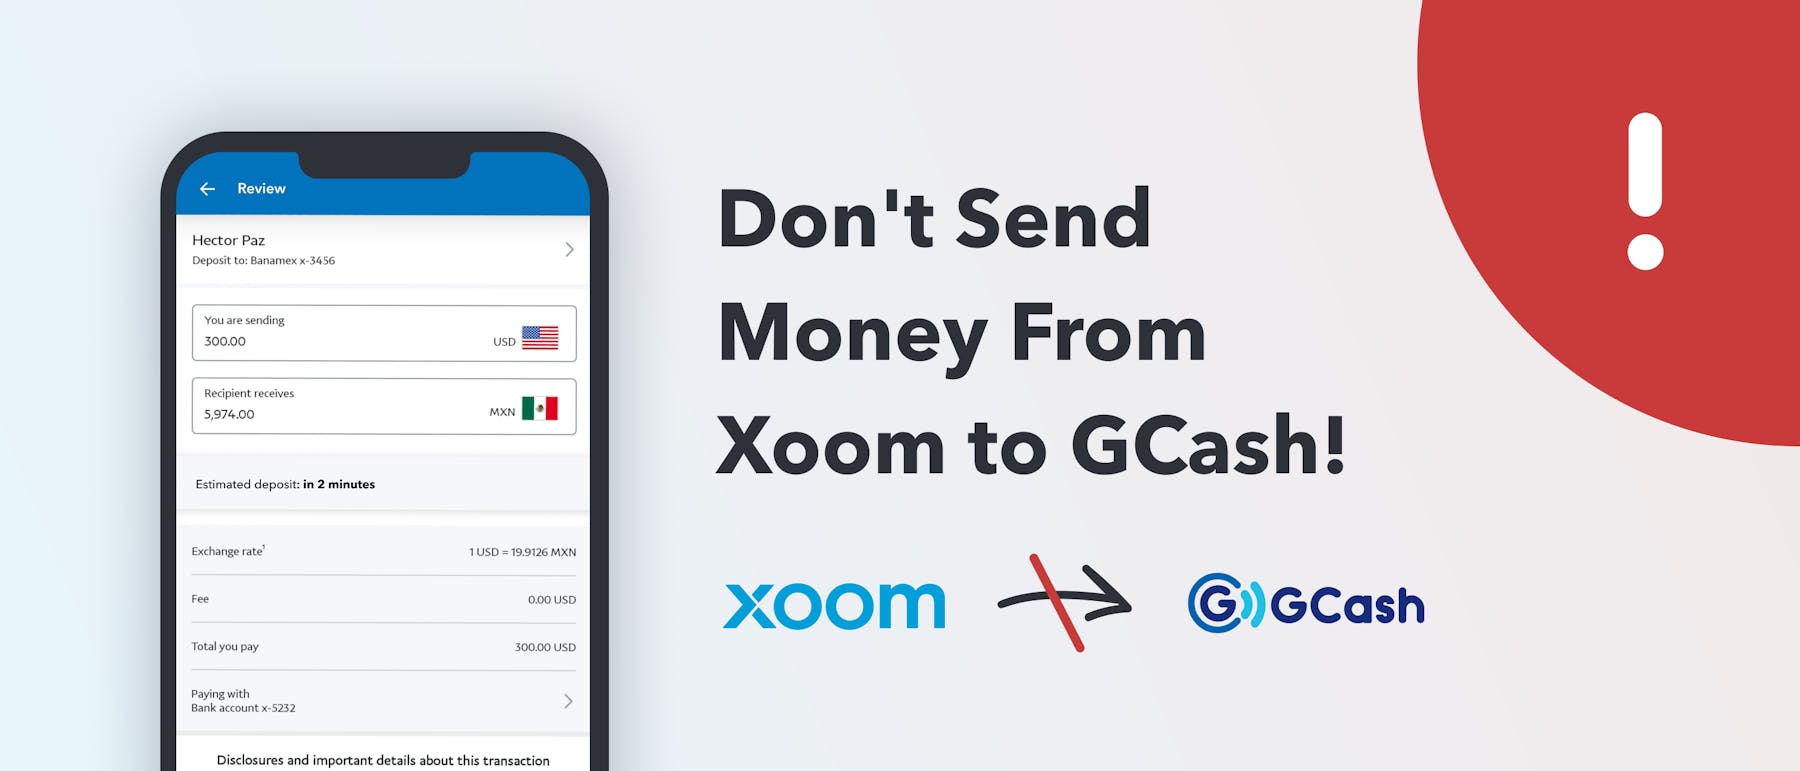 How to transfer money from Xoom to GCash